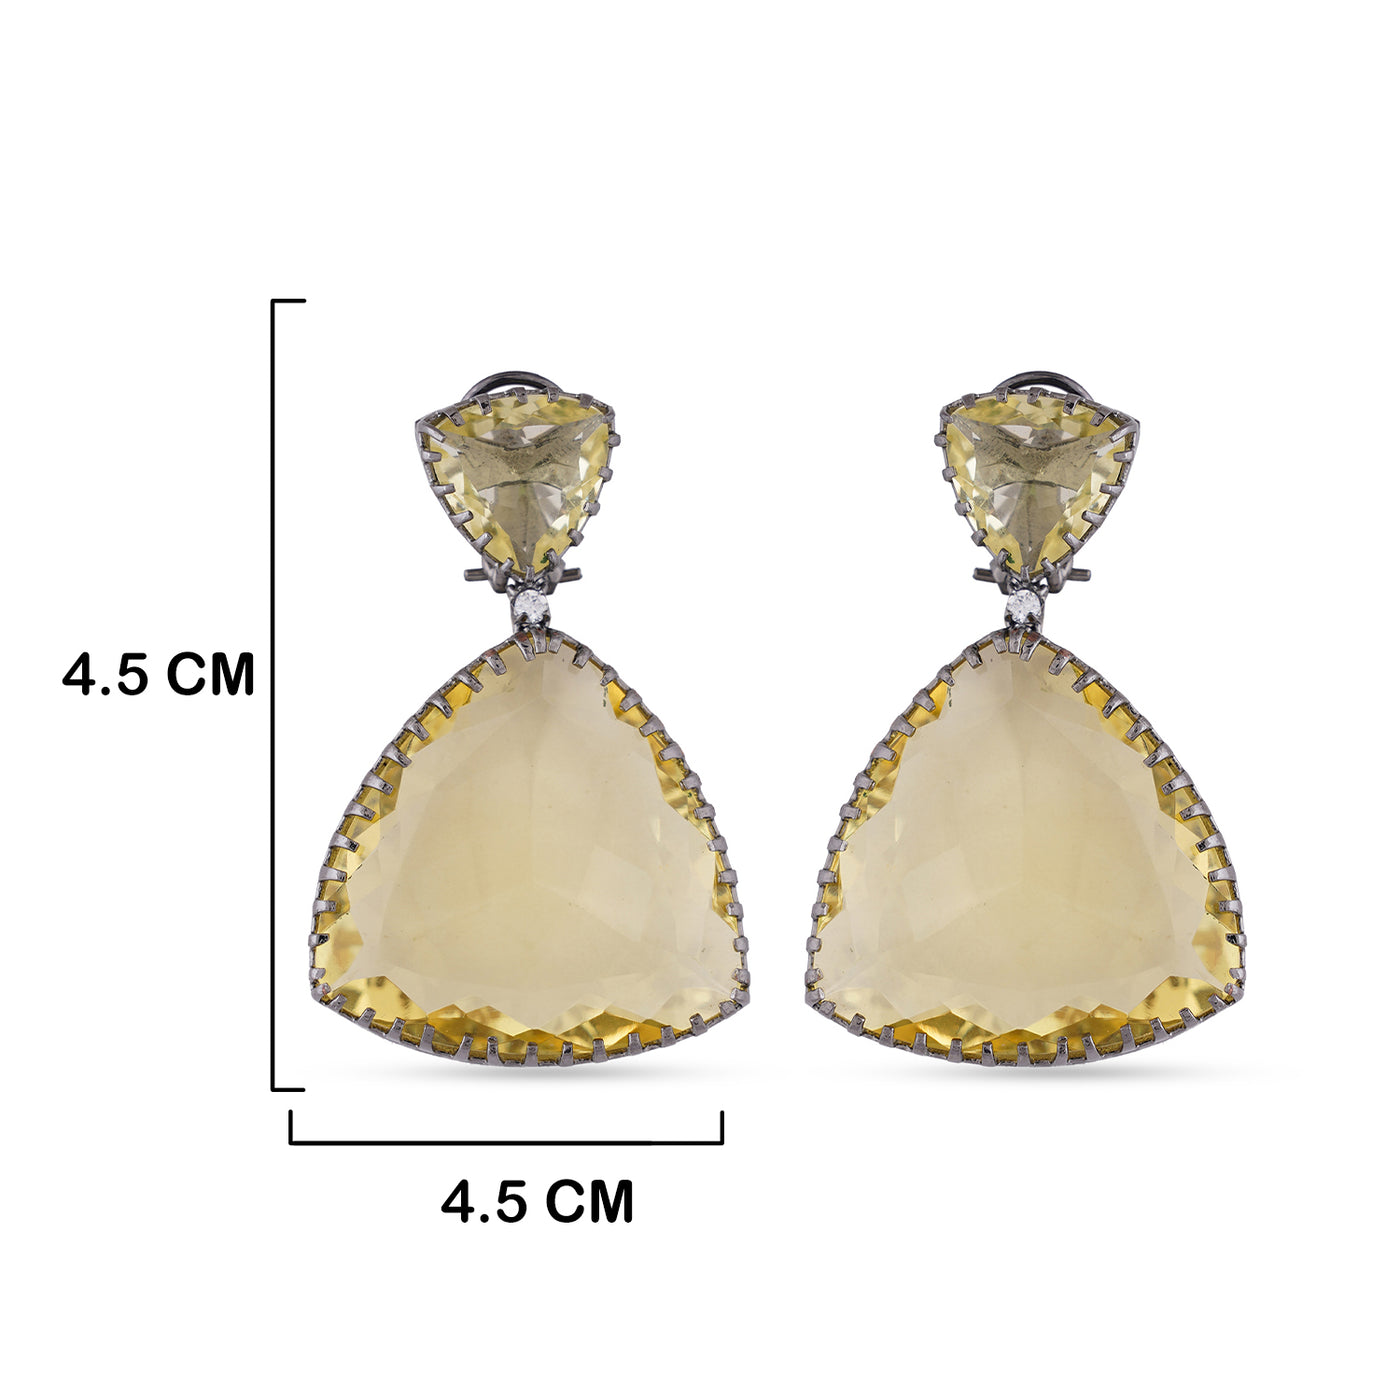 Yellow Glass Dangle Earrings with measurements in cm. 4.5cm by 4.5cm.